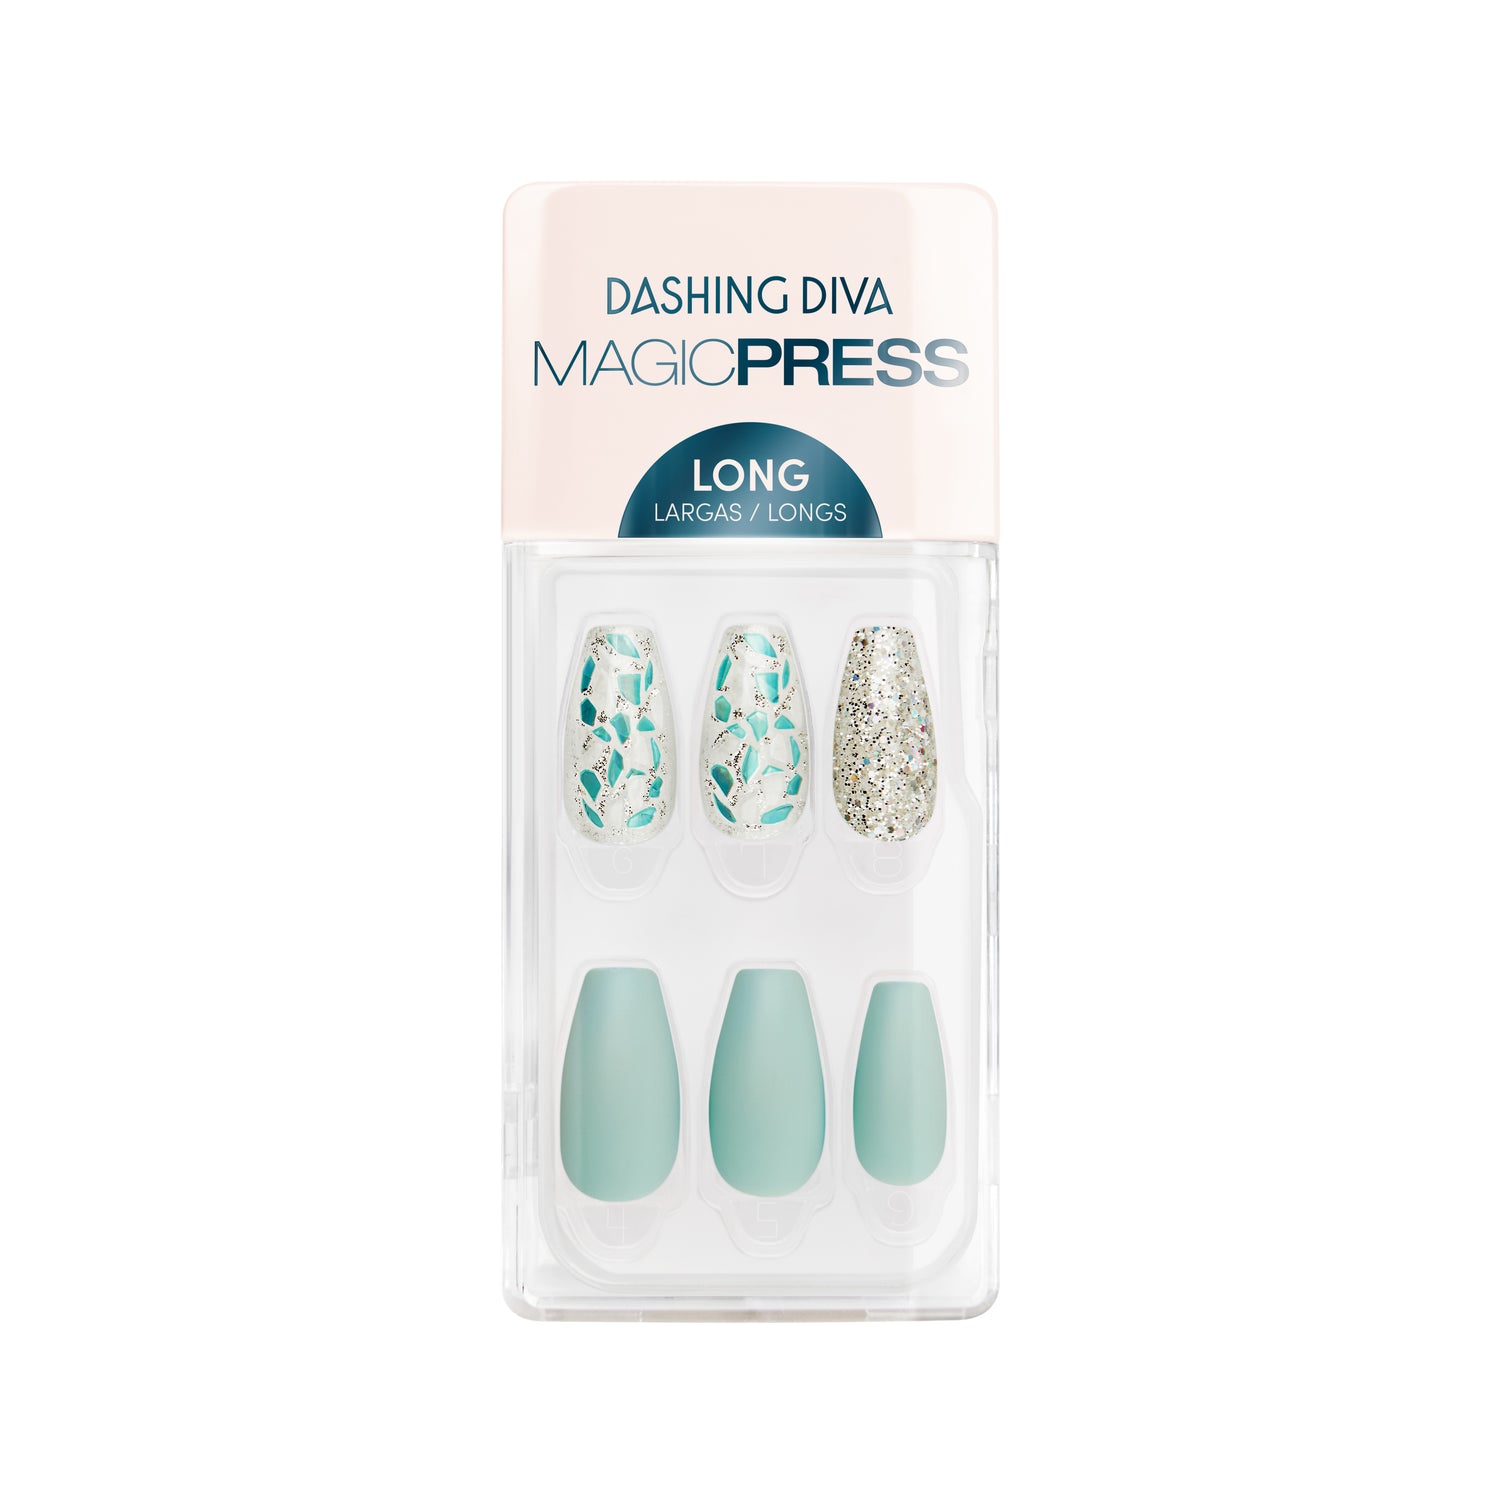 Dashing Diva MAGIC PRESS long, coffin seafoam green press on gel nails with mosaic and silver glitter accents.